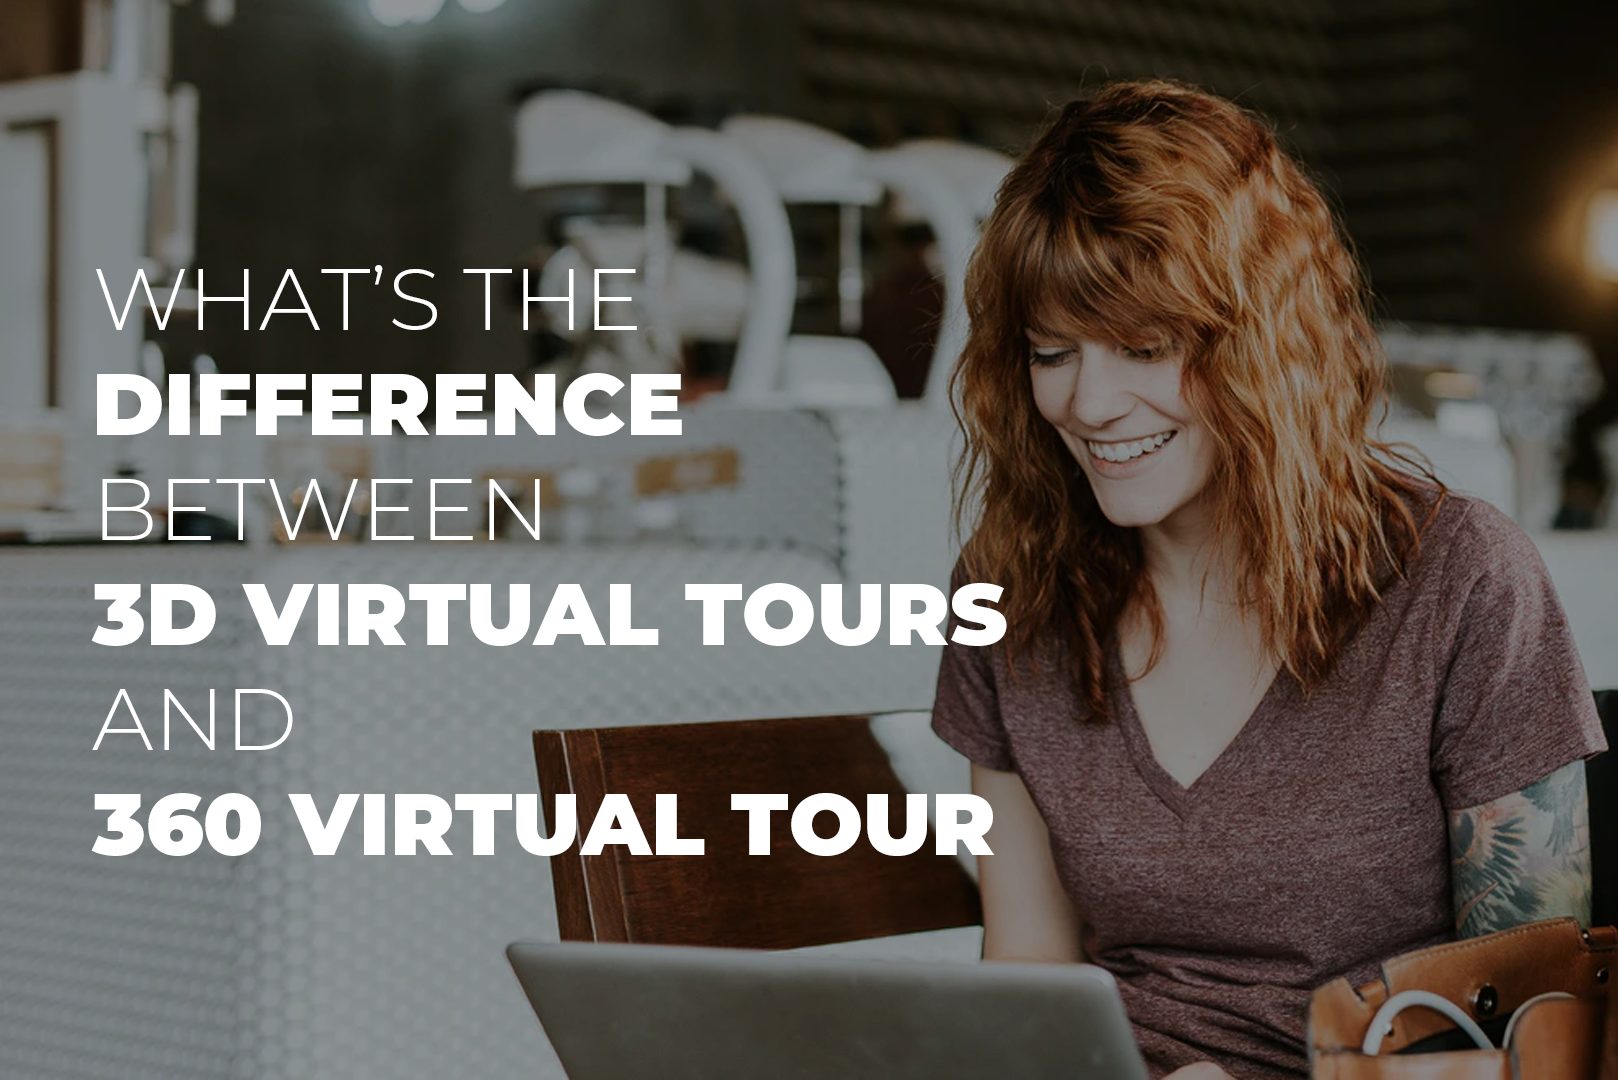 What’s The Difference Between 3D Virtual Tours And 360 Virtual Tour